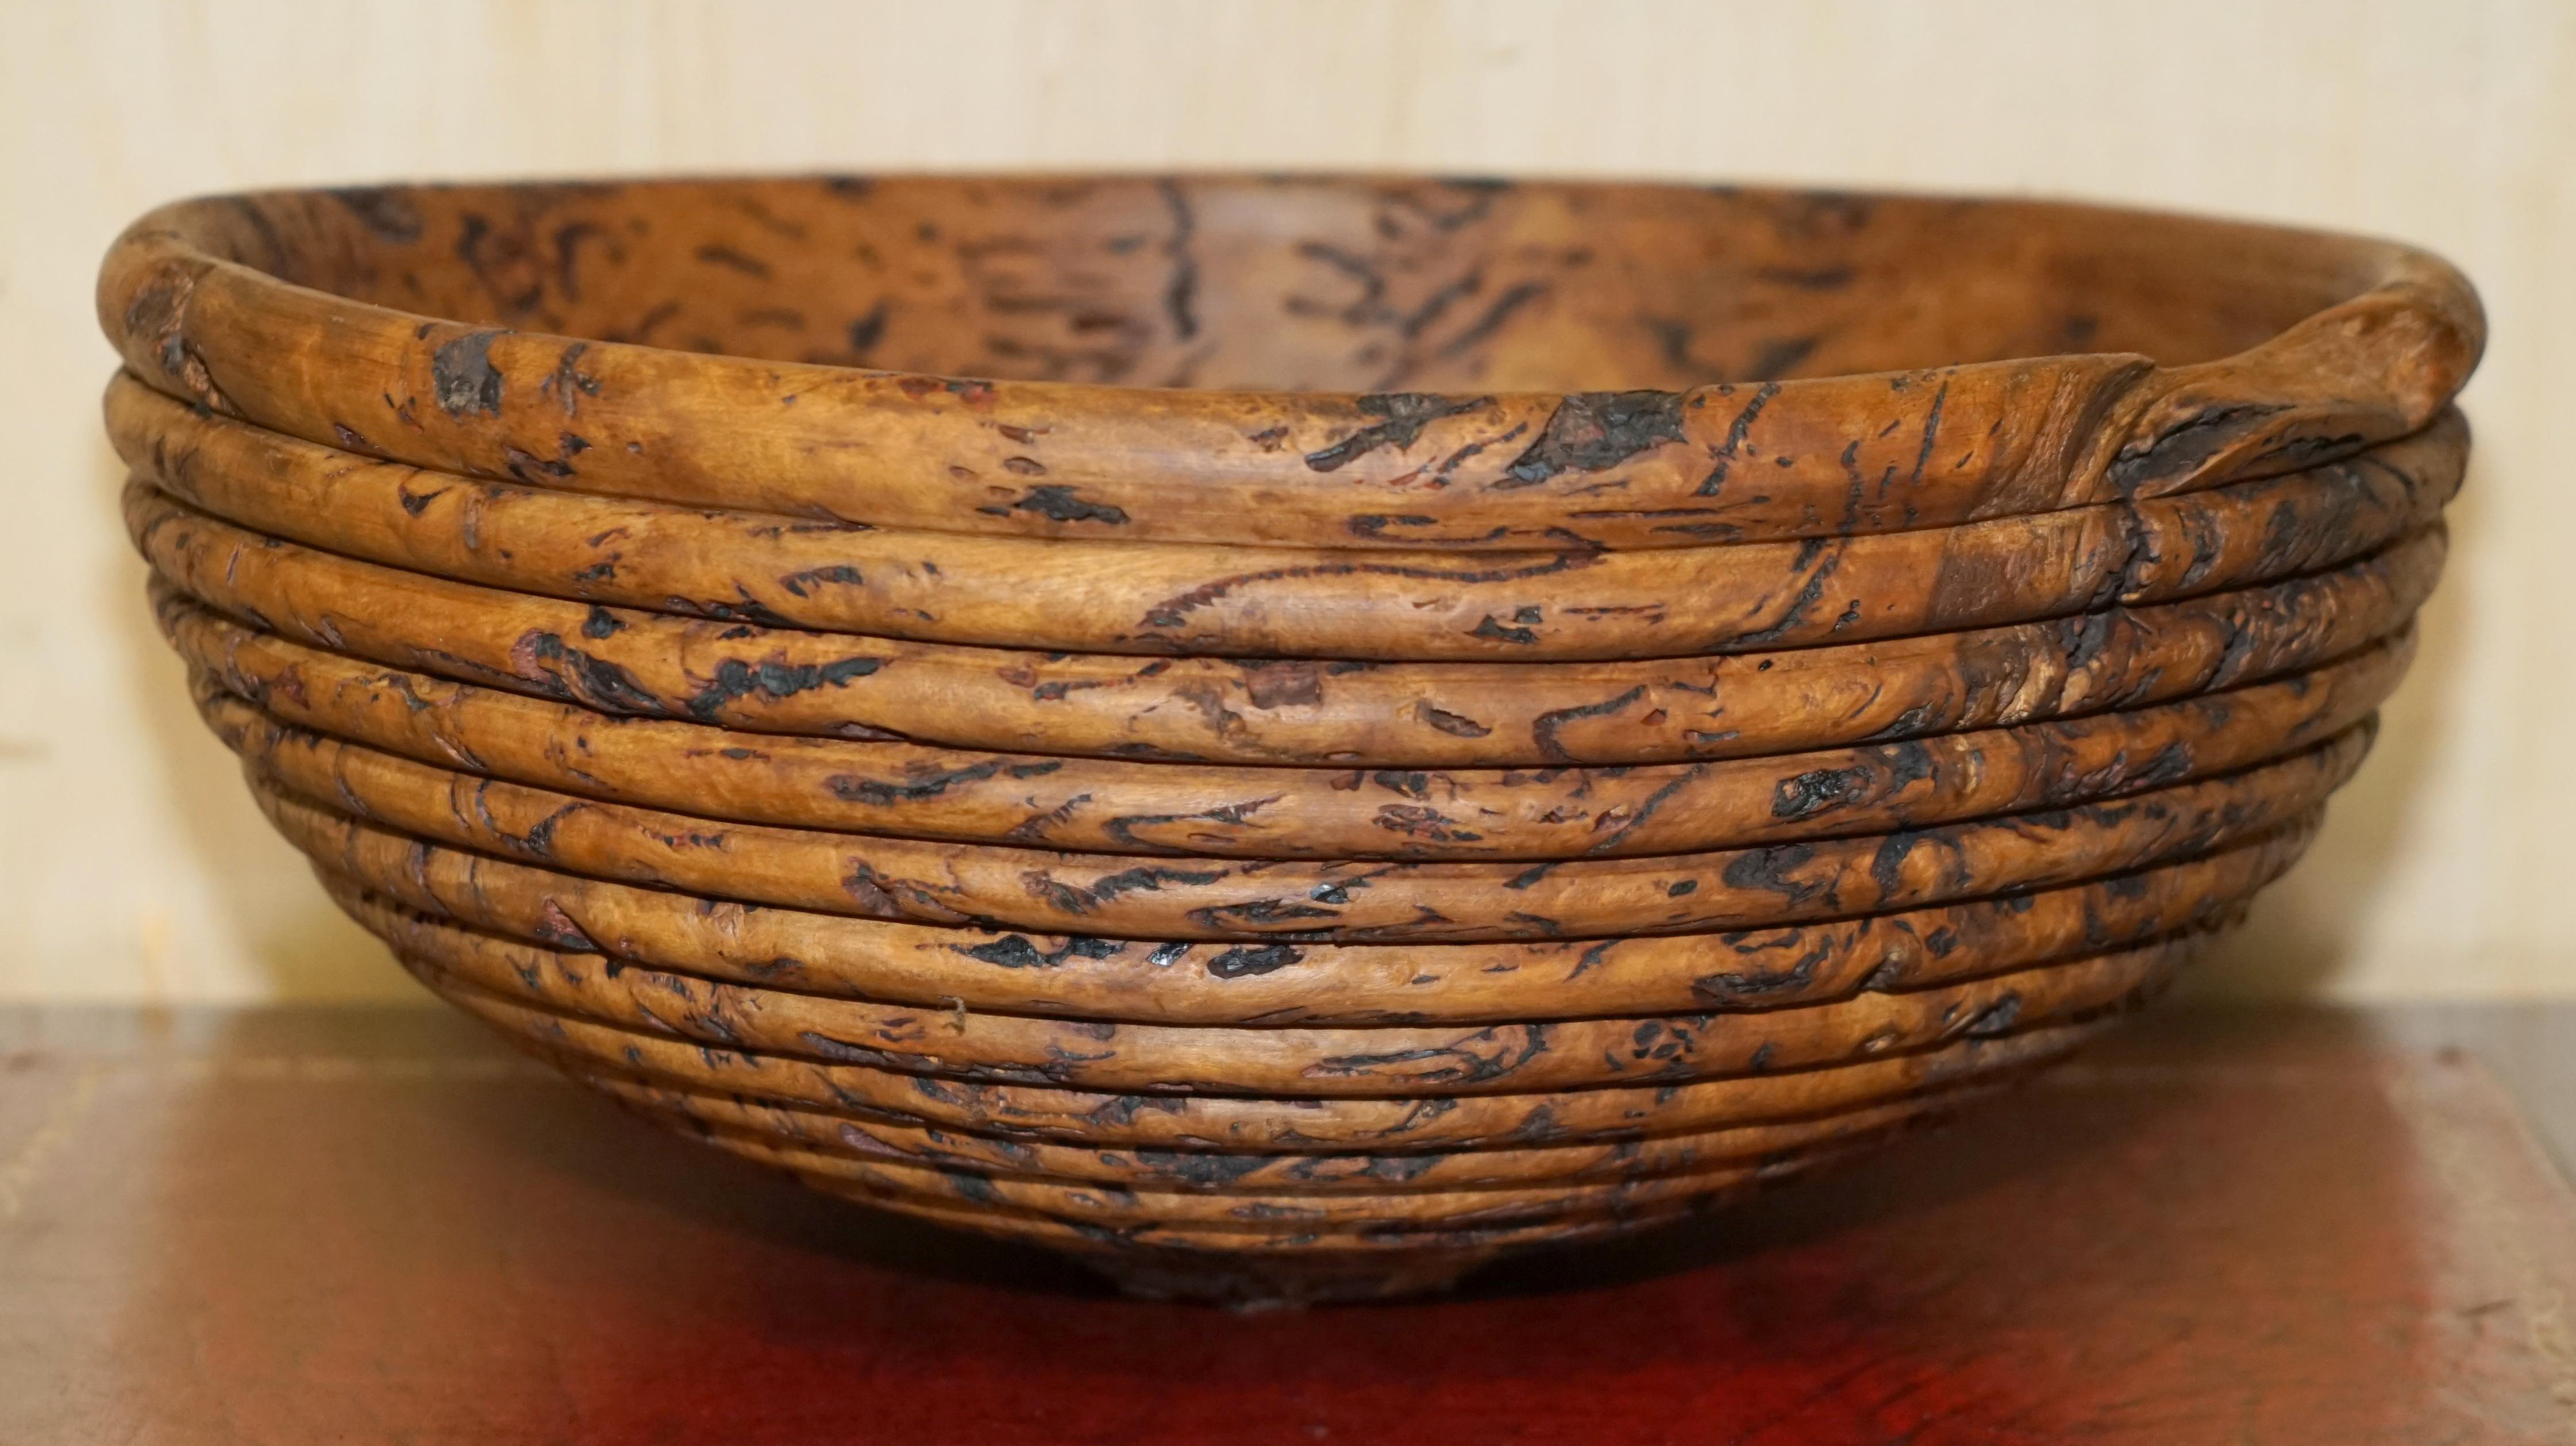 EXTRA LARGE HEAVILY BURRED EUCALYPTUS BOWL SIGNED B MOSS FOR FRUiT ETC MUST SEE For Sale 5